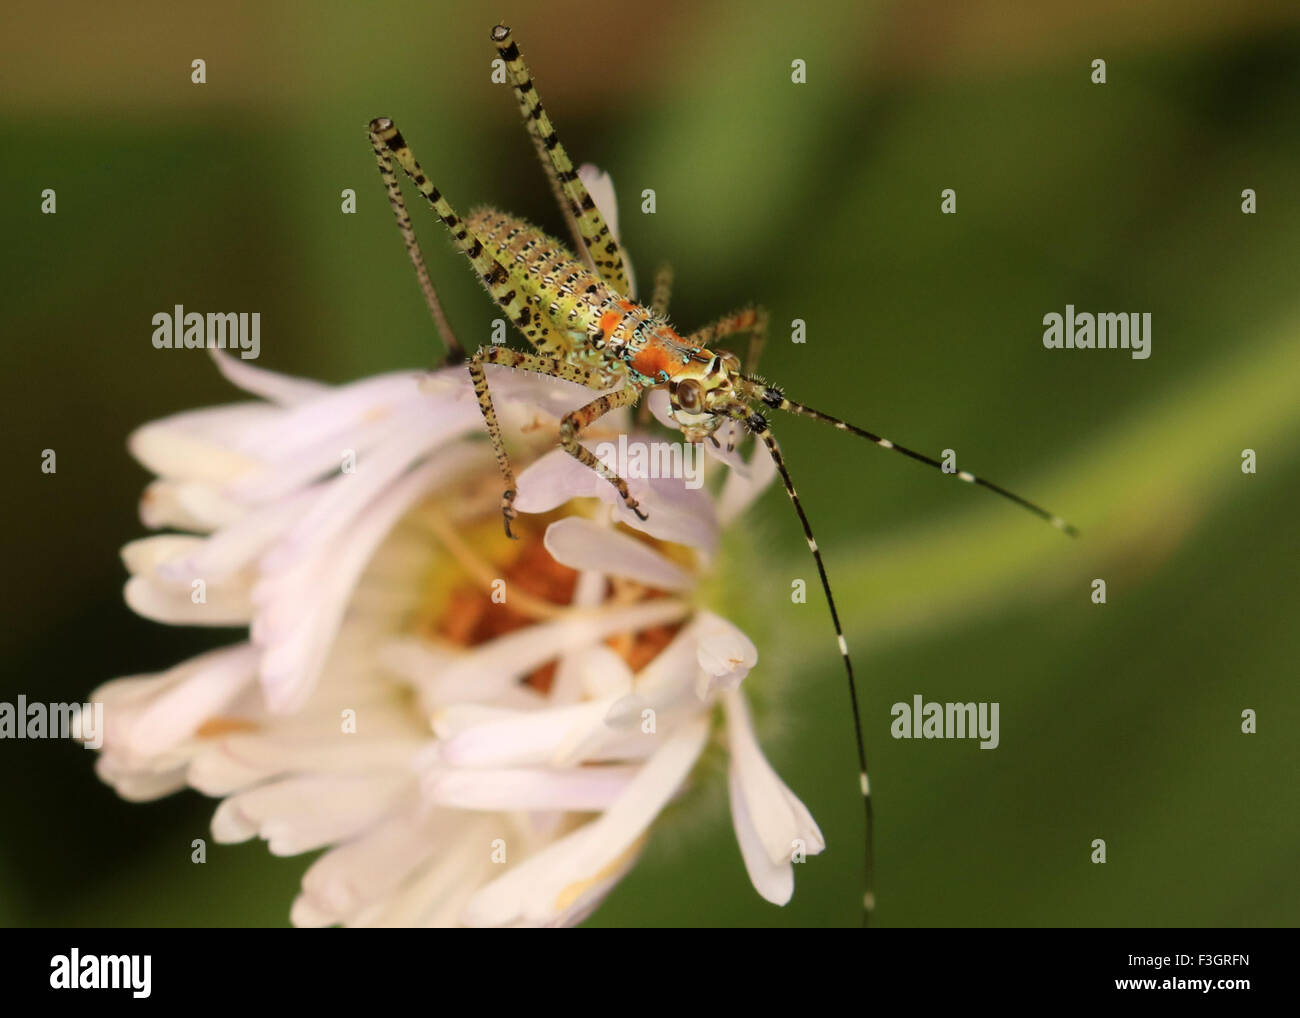 katydid nymph insect Stock Photo